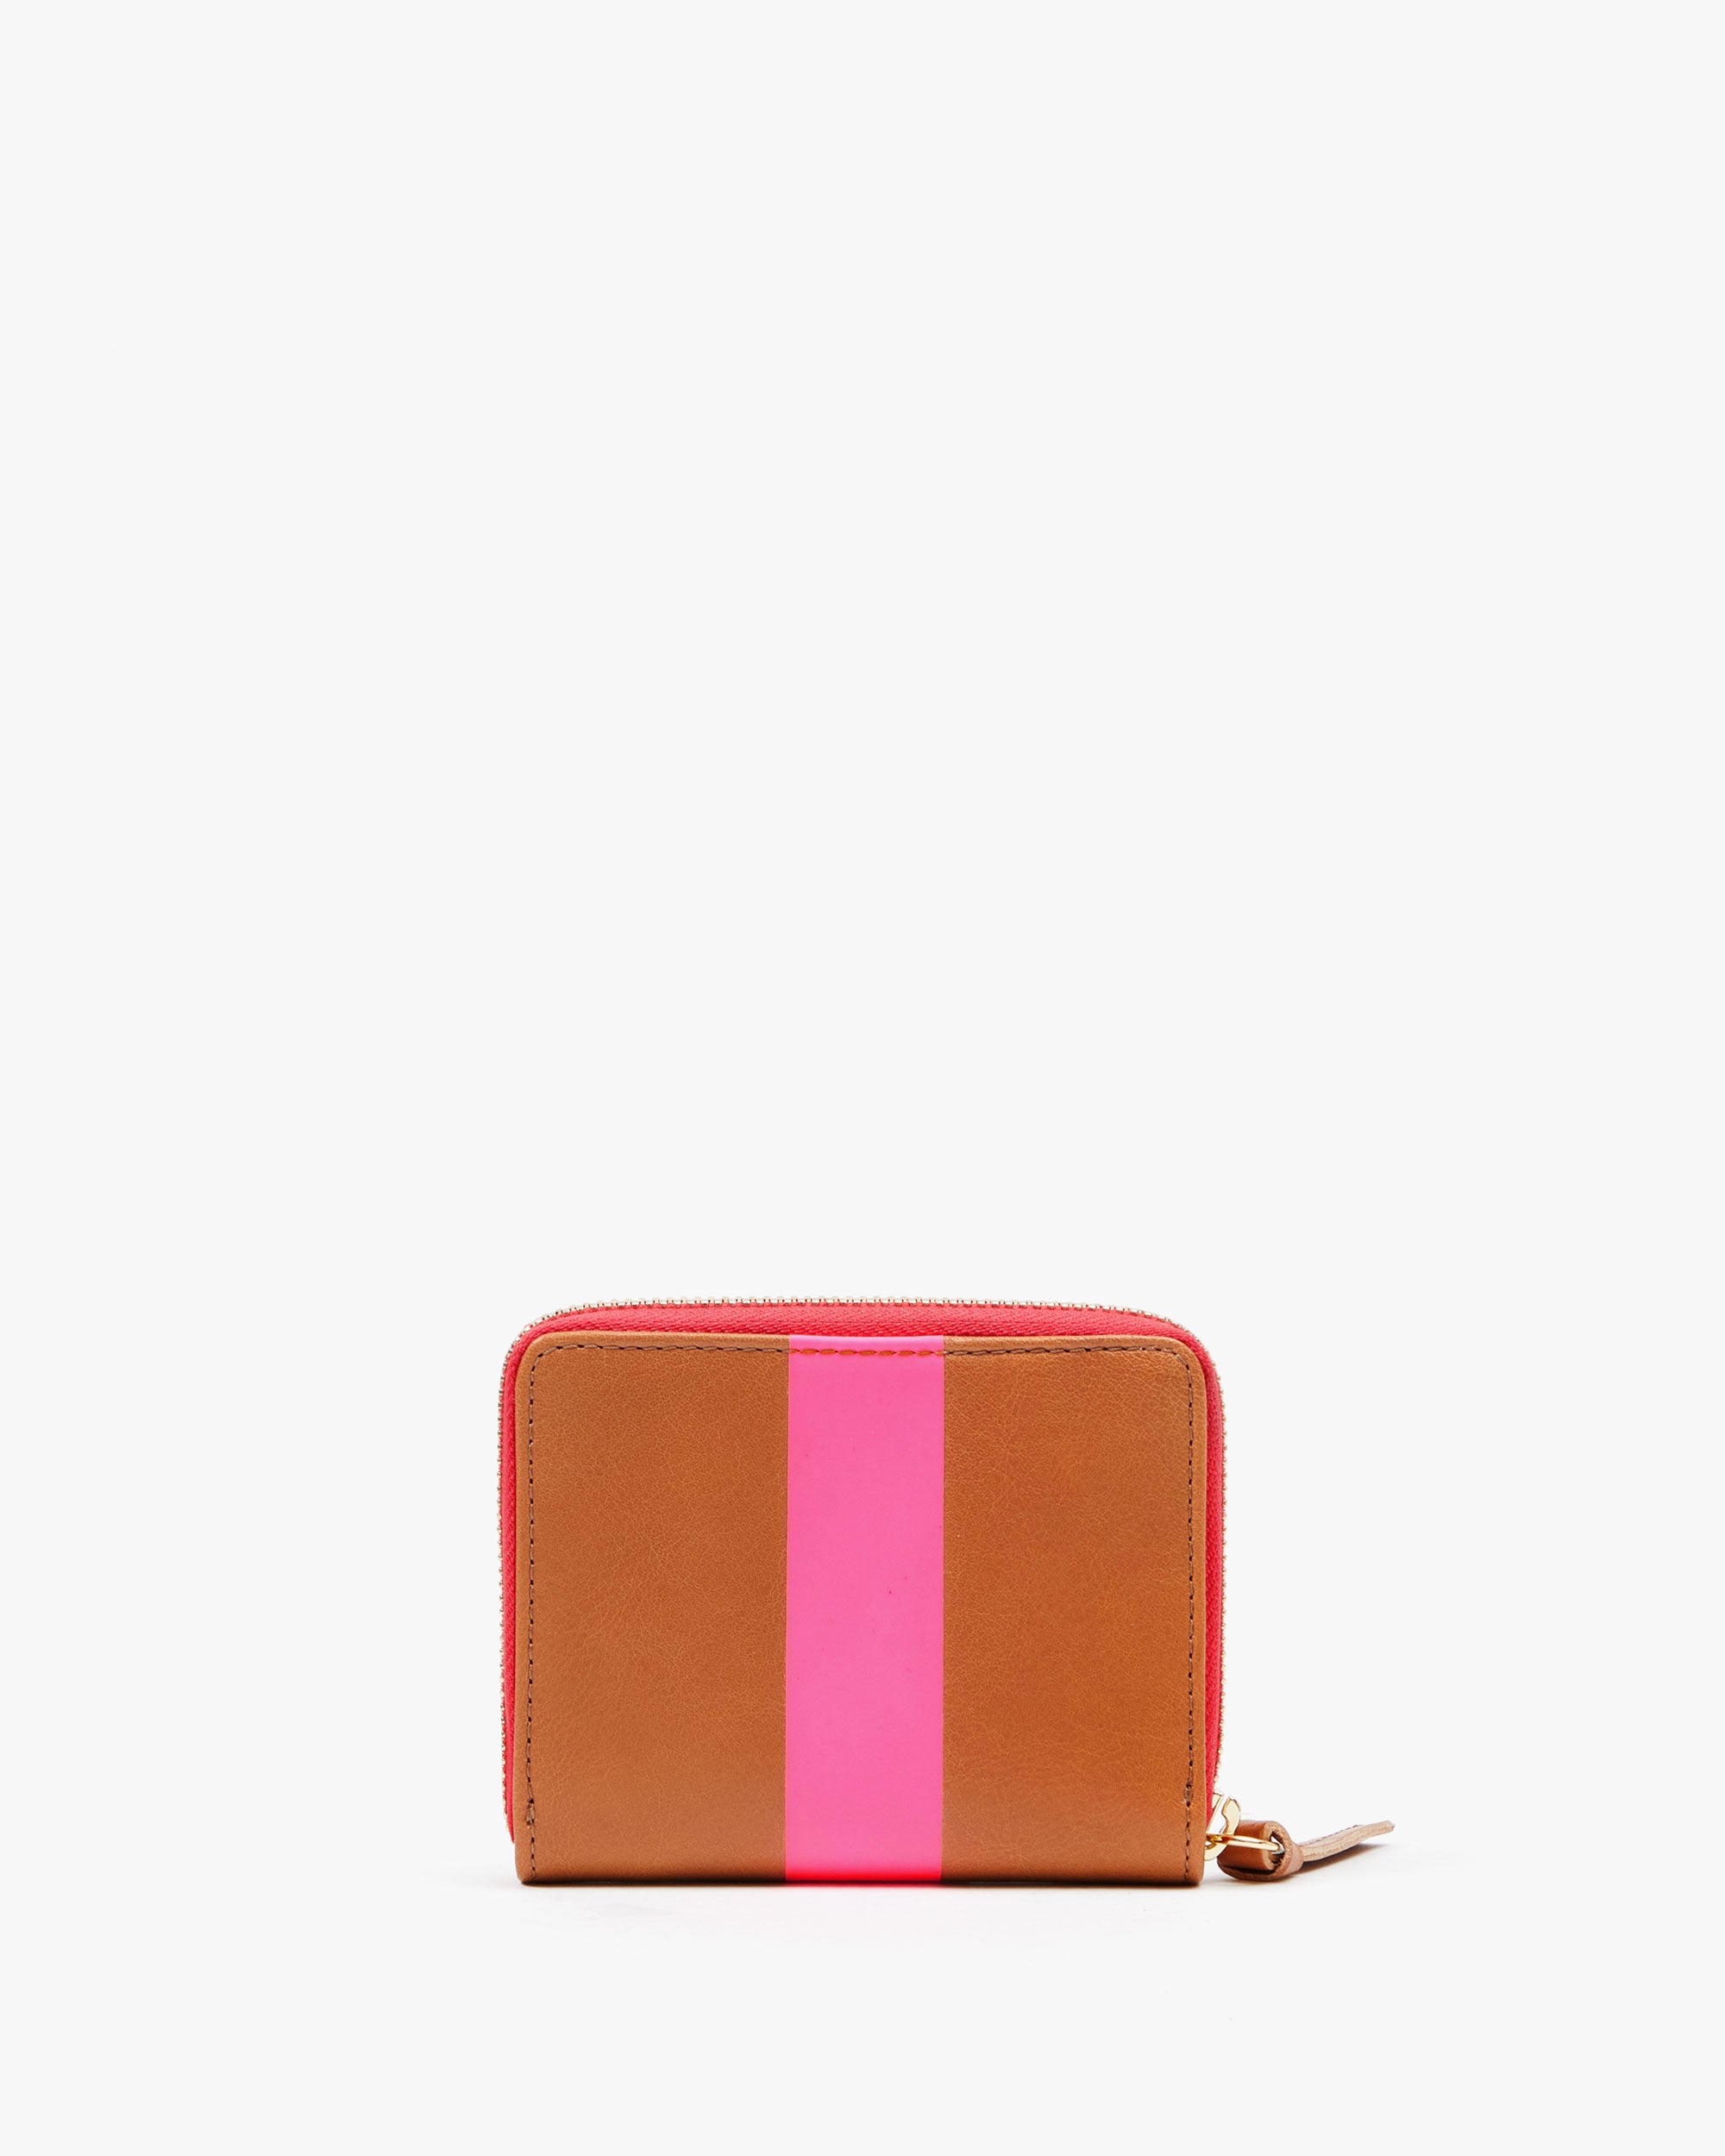 Clare V. chit chat. Matilde with the Neon Pink Le Zip Sac